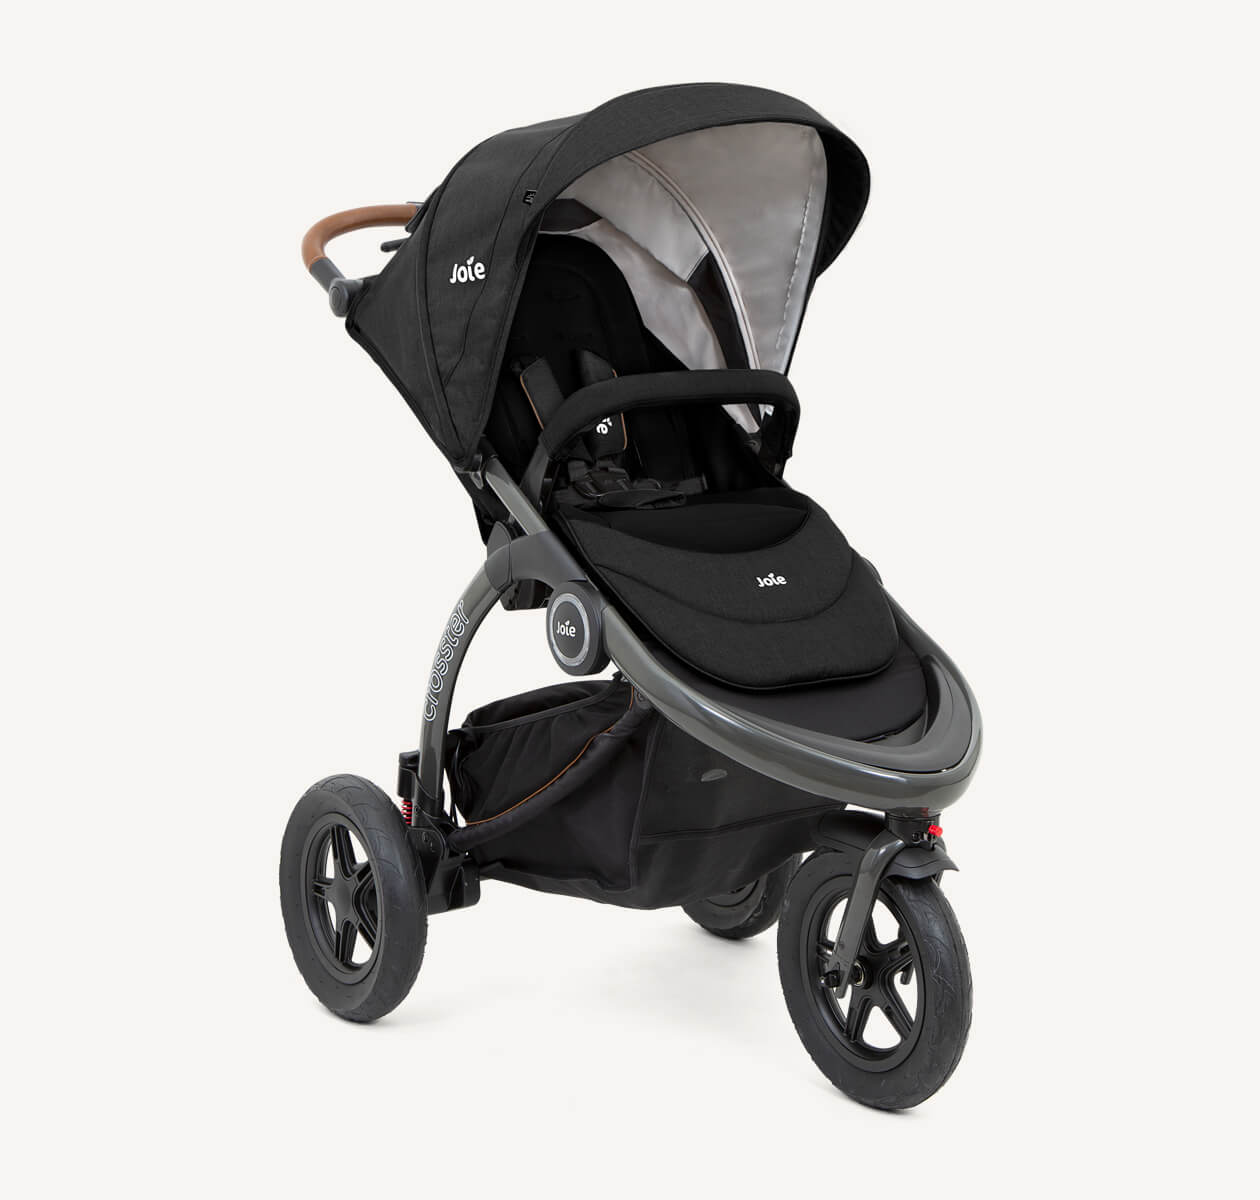 Pushchairs, Prams, Strollers and Travel Systems | Joie Baby UK